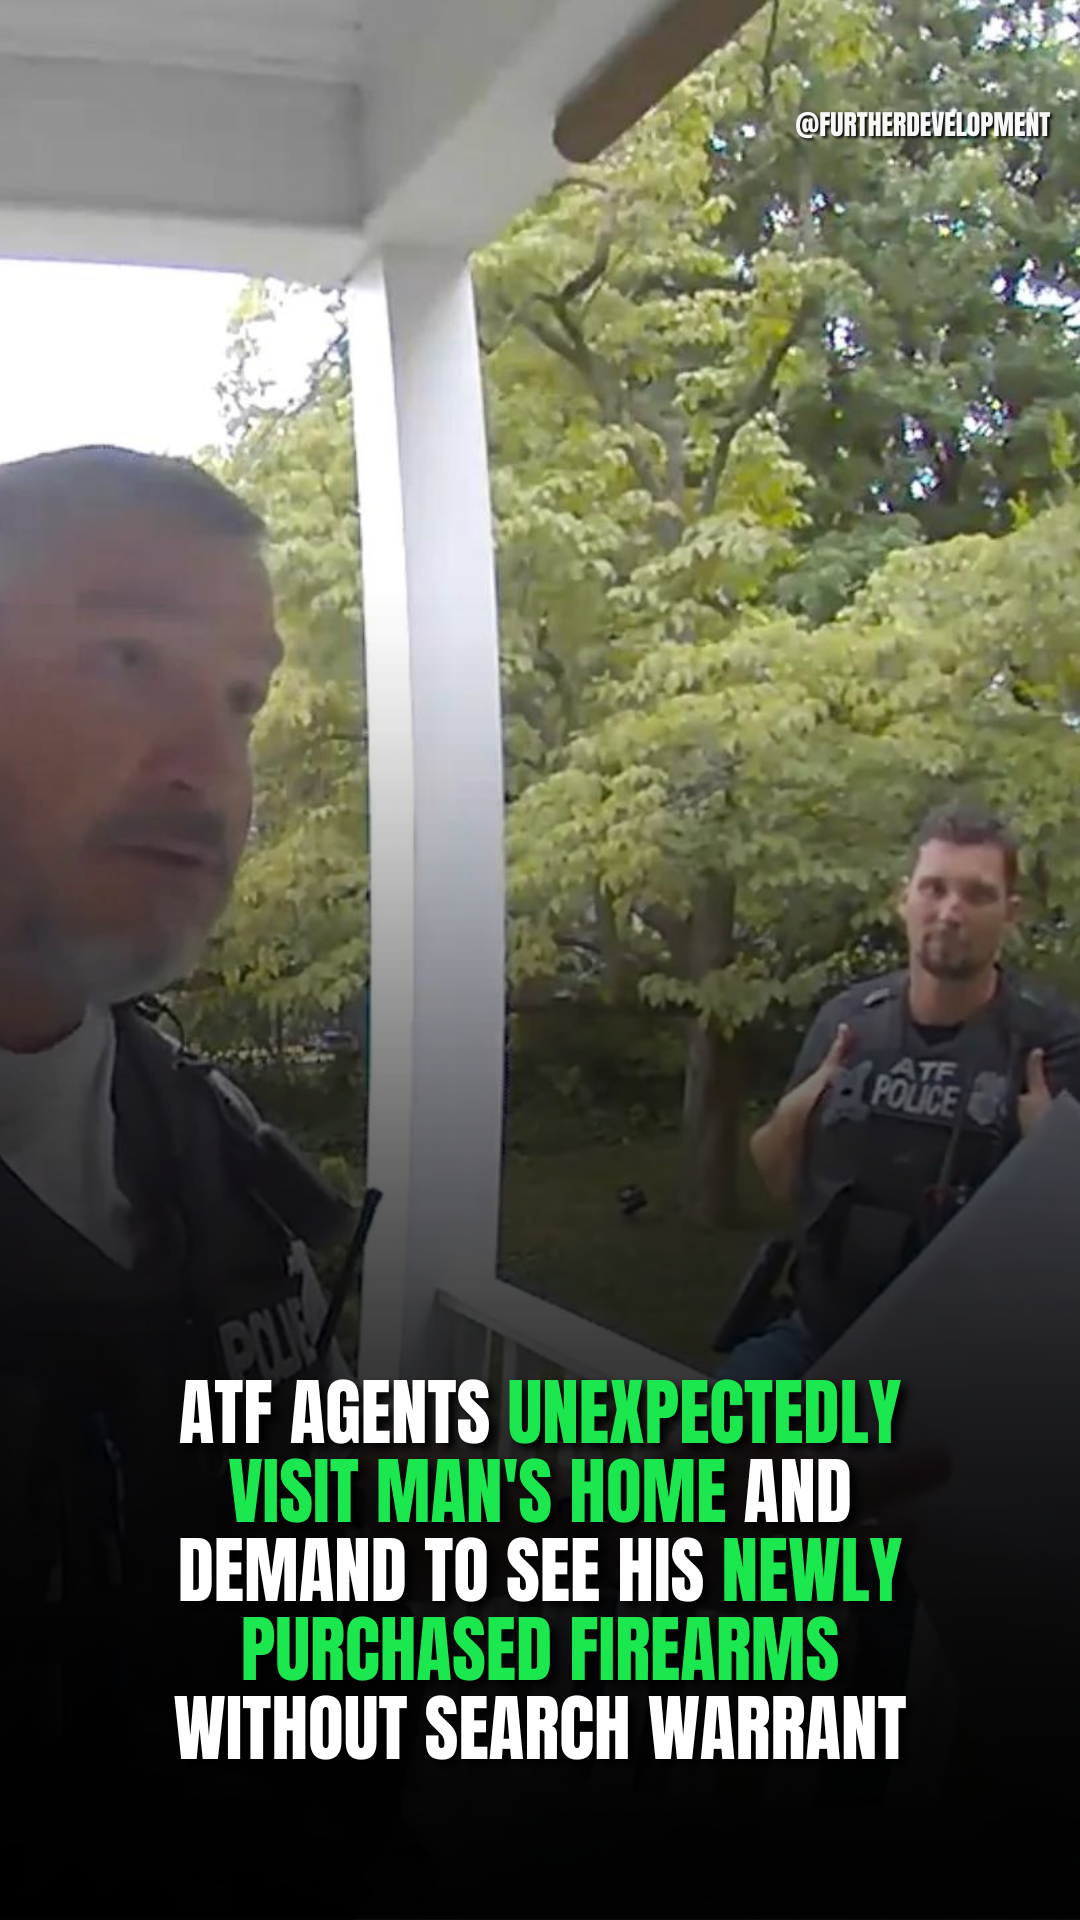 ATF Agents Unexpectedly Visit Man's Home and Demand to See his Newly Purchased Firearms Without Search Warrant